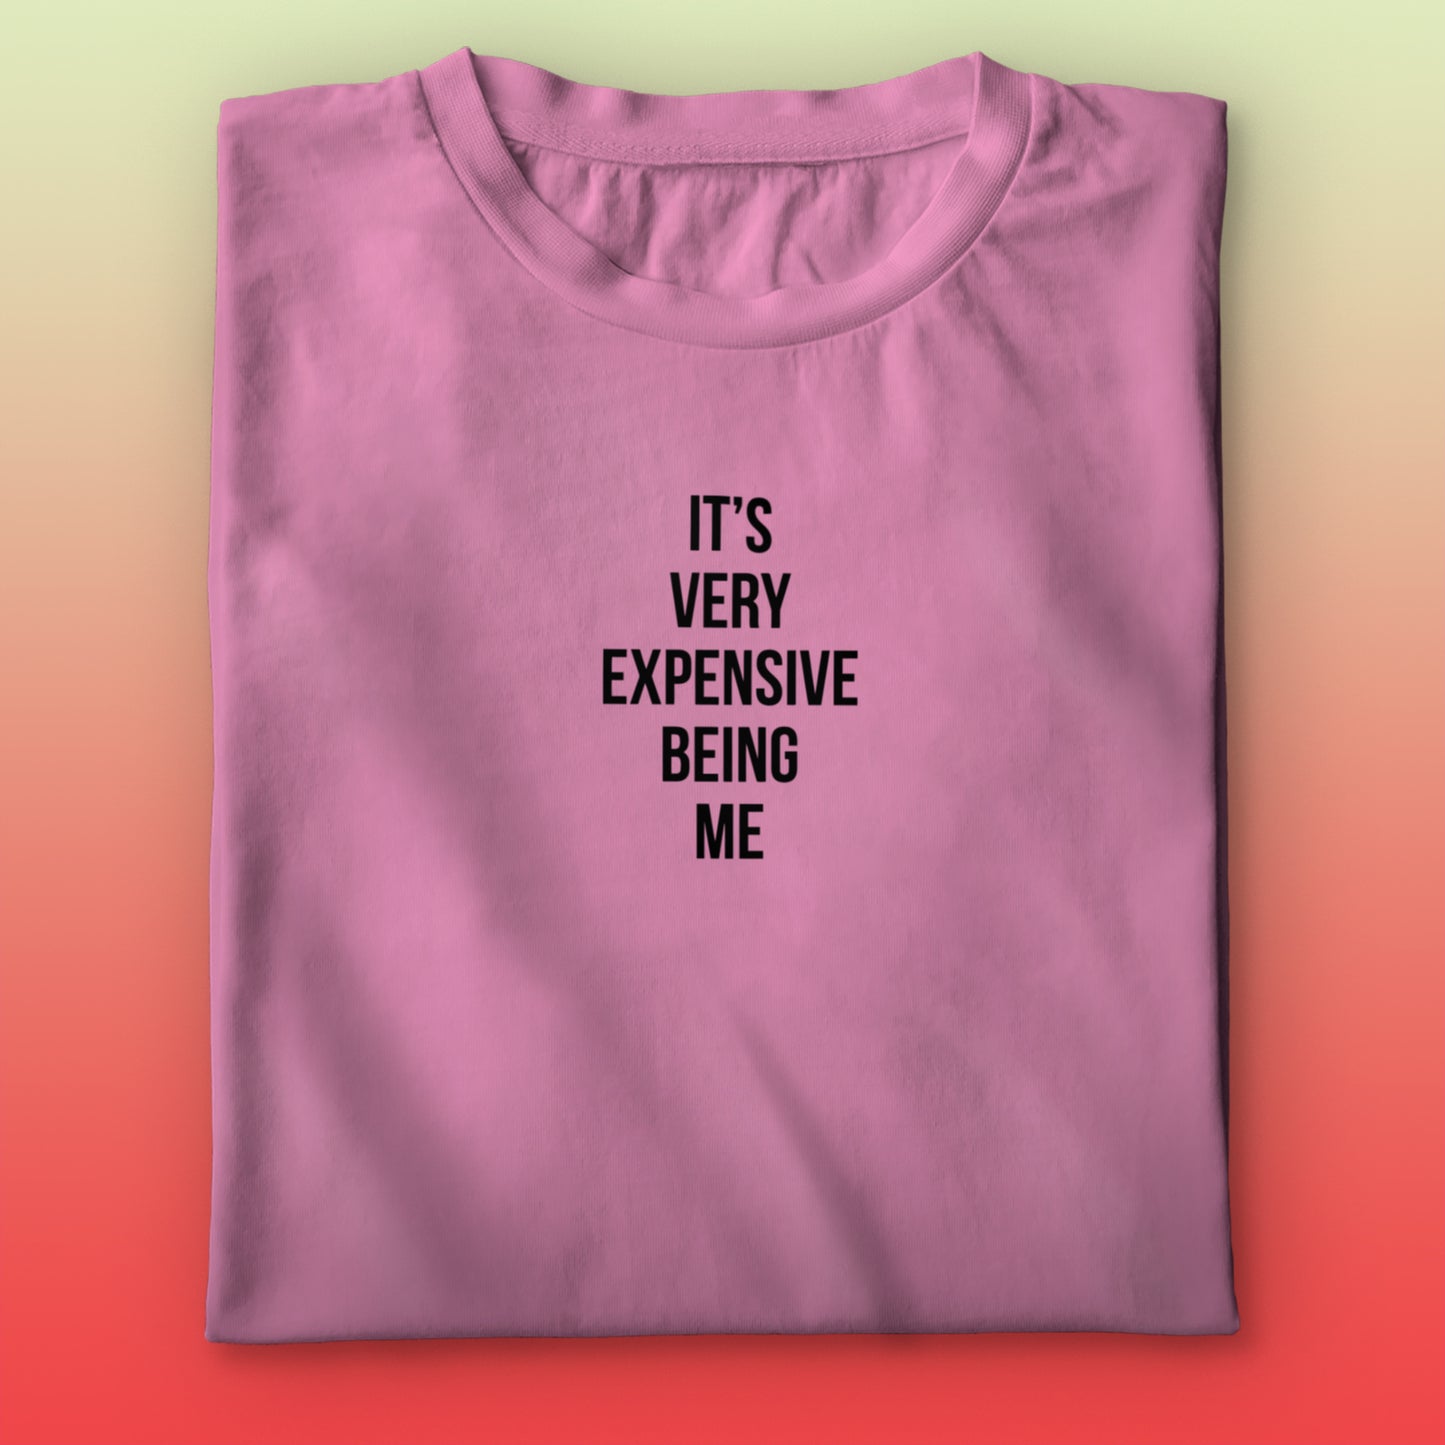 Expensive T-shirt